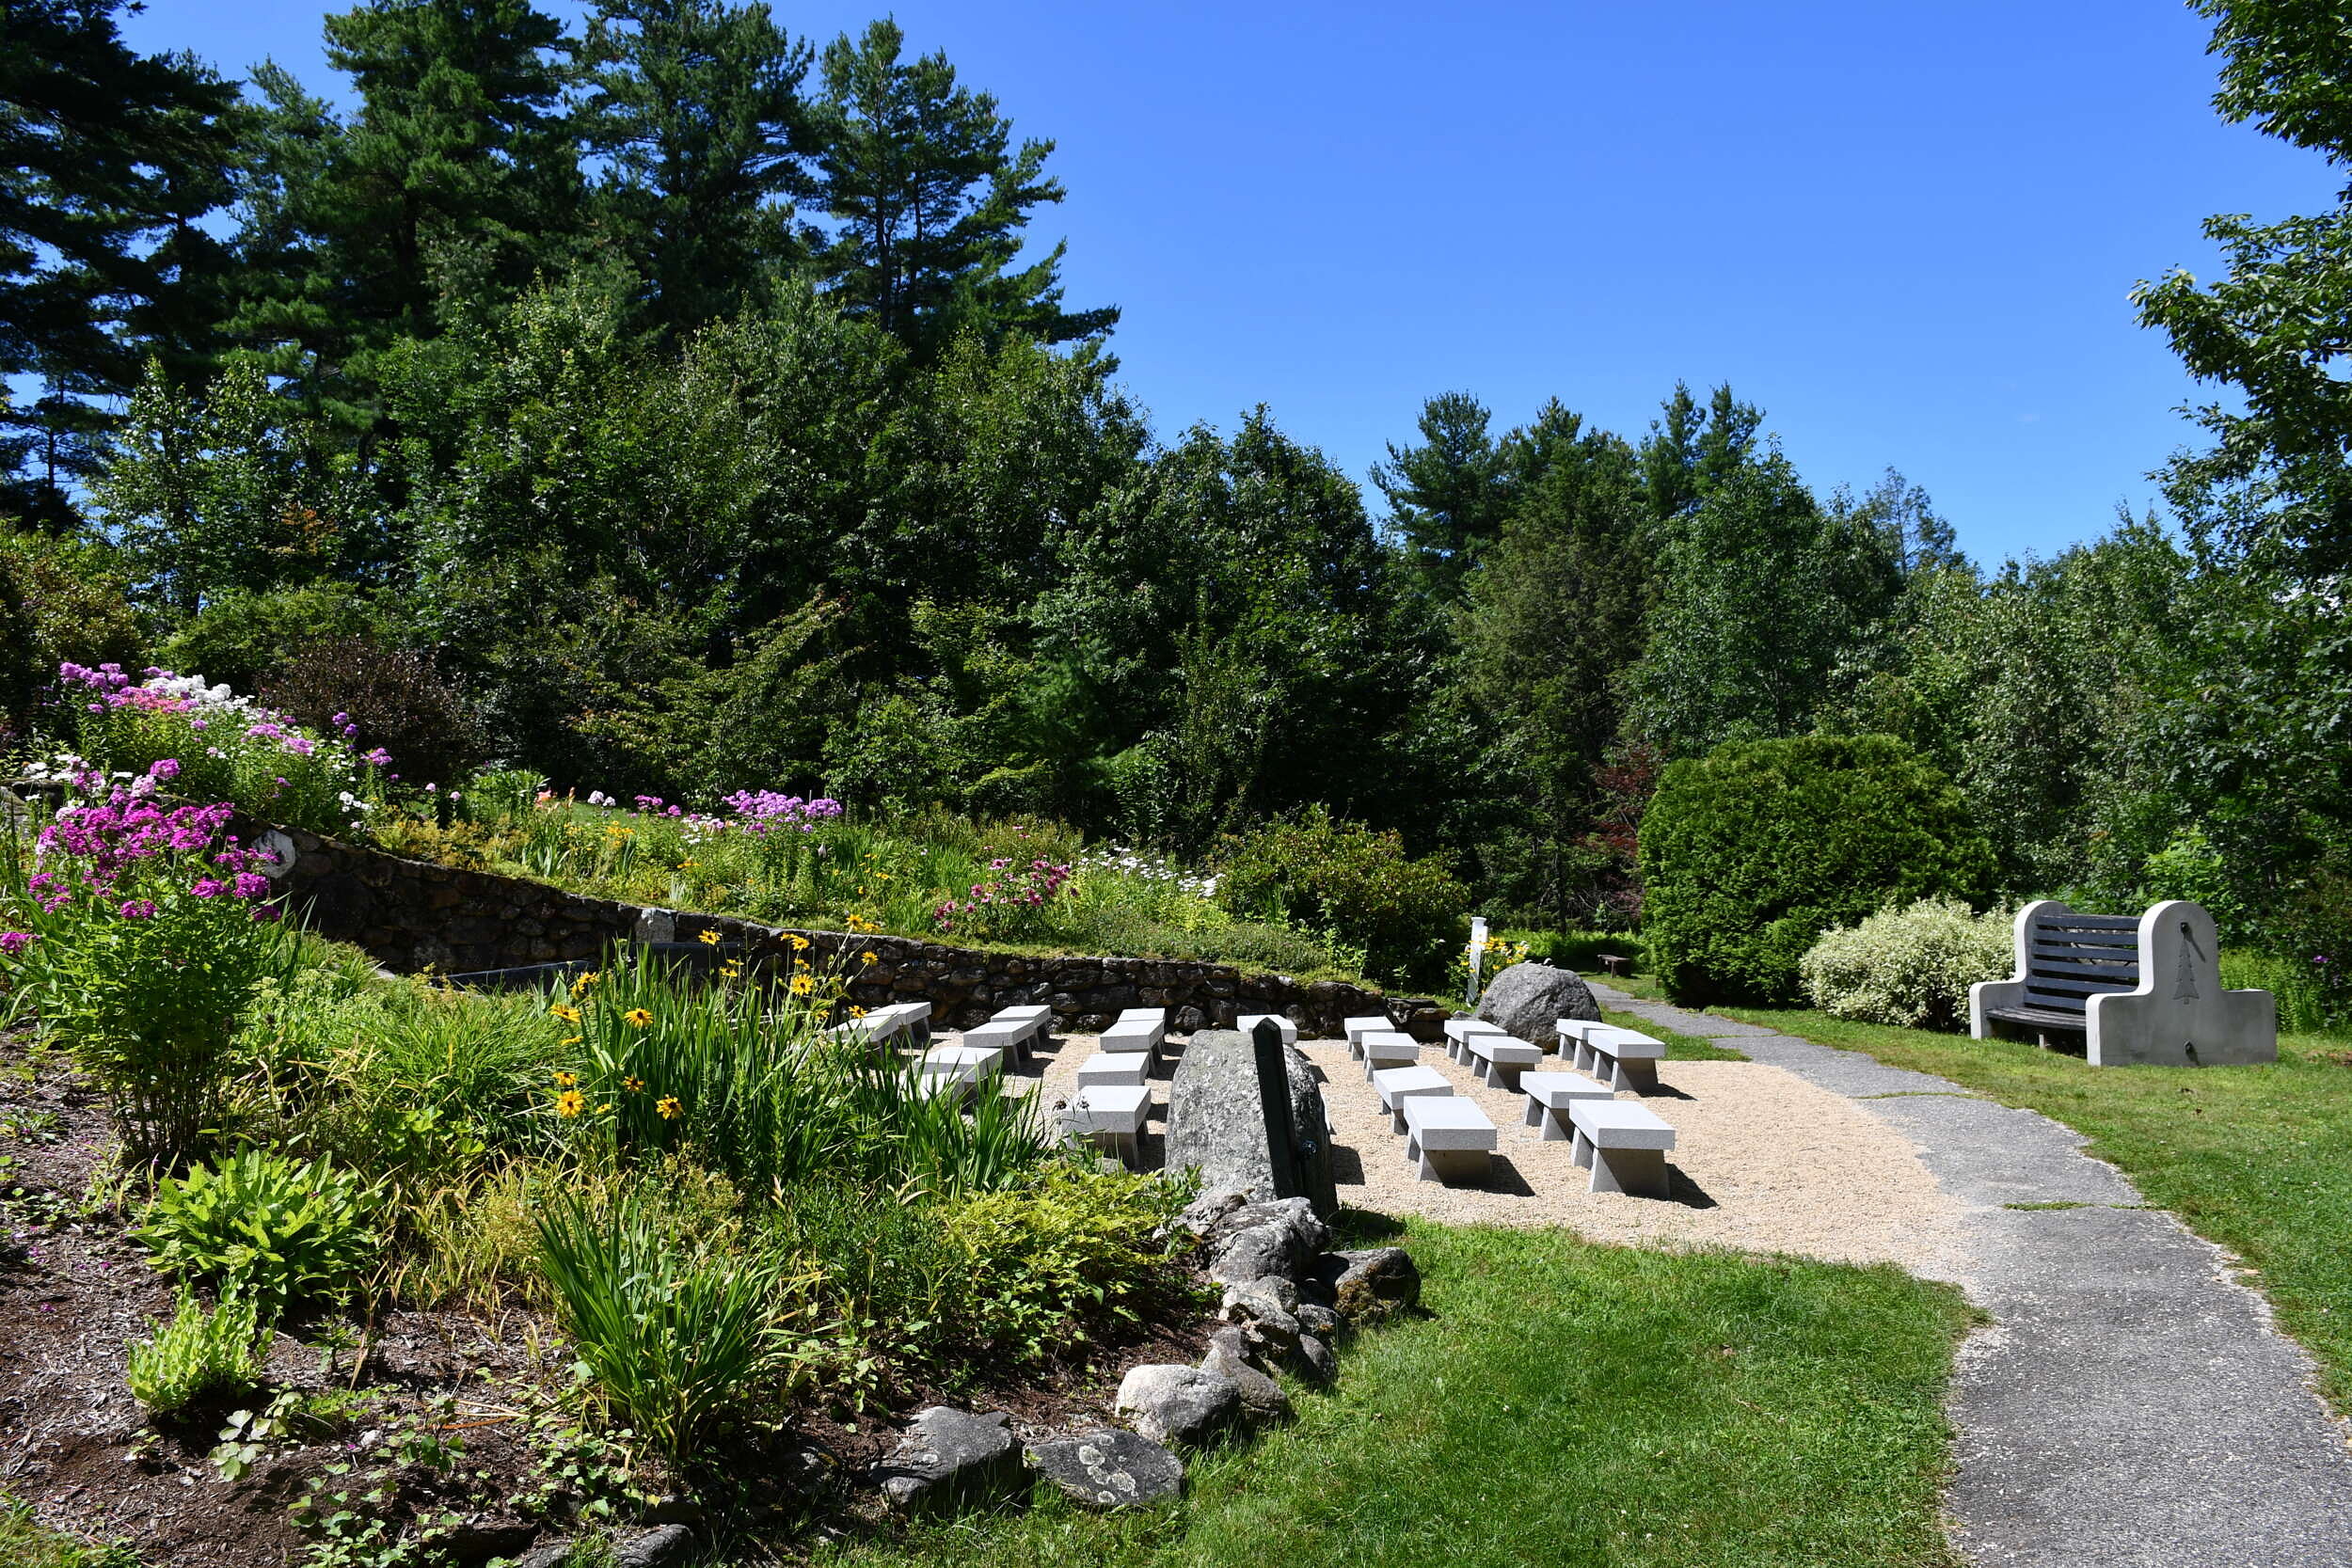 Flowers grow along a small slope, with rows of white benches between, next to a walking path. (photo © Audrey Dunn)